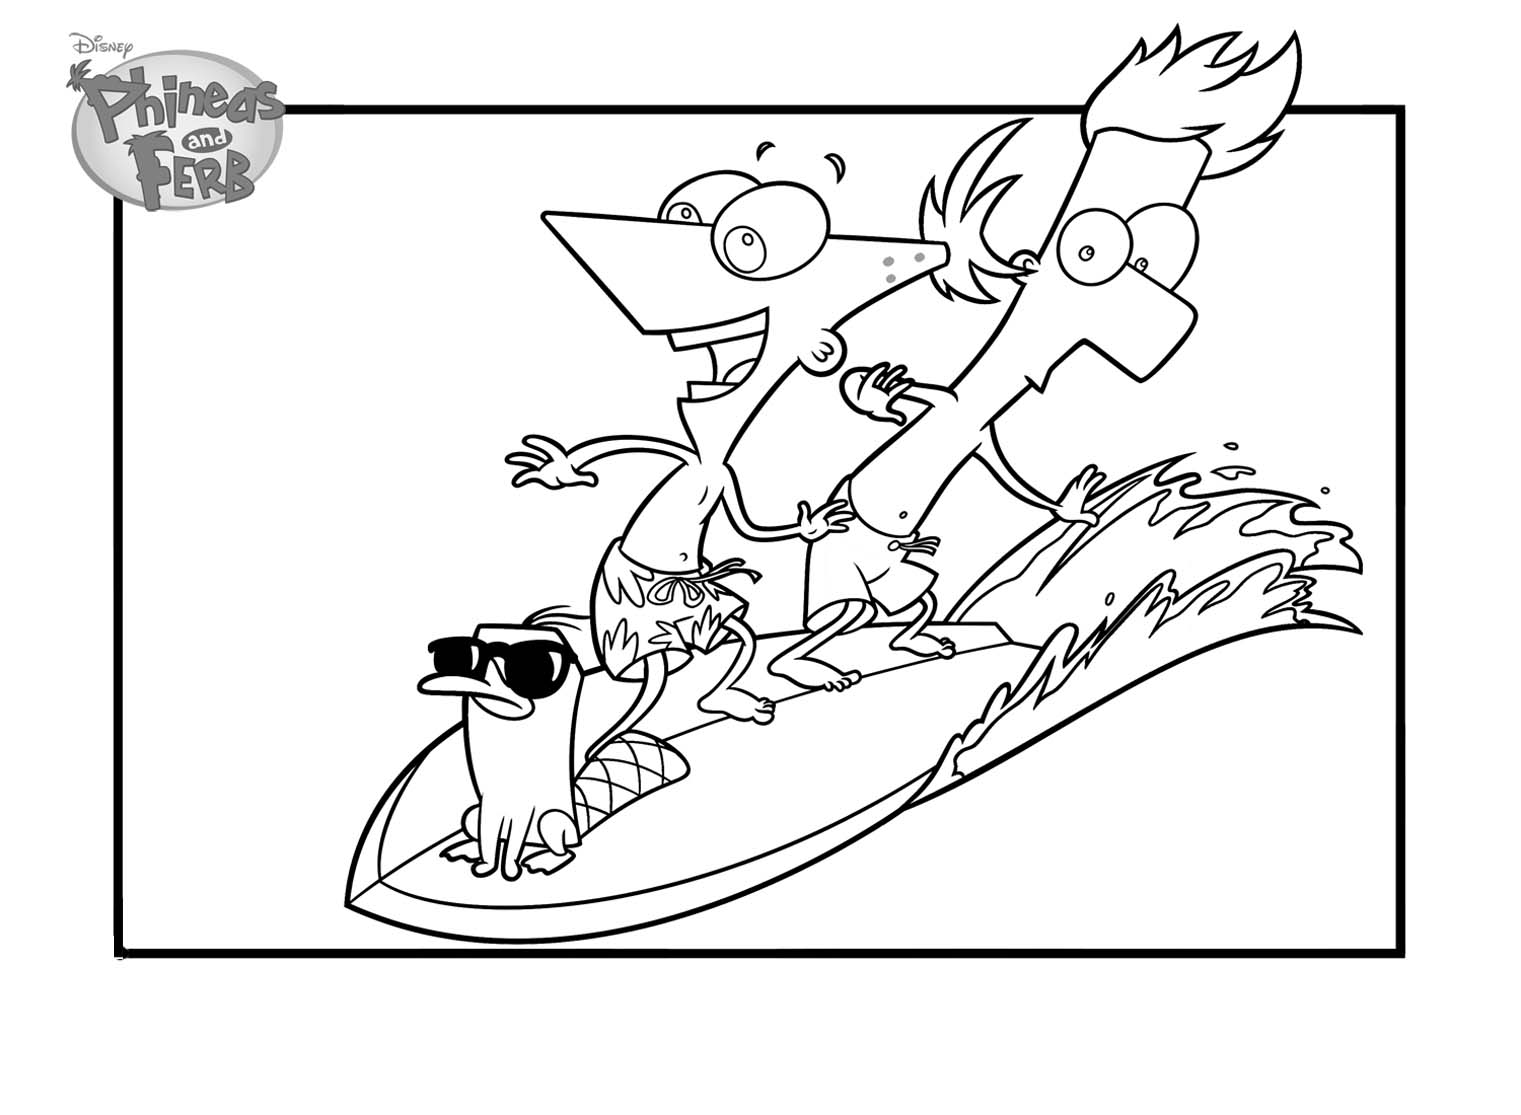 Drawing of Phineas and Ferb (Disney) to print and color